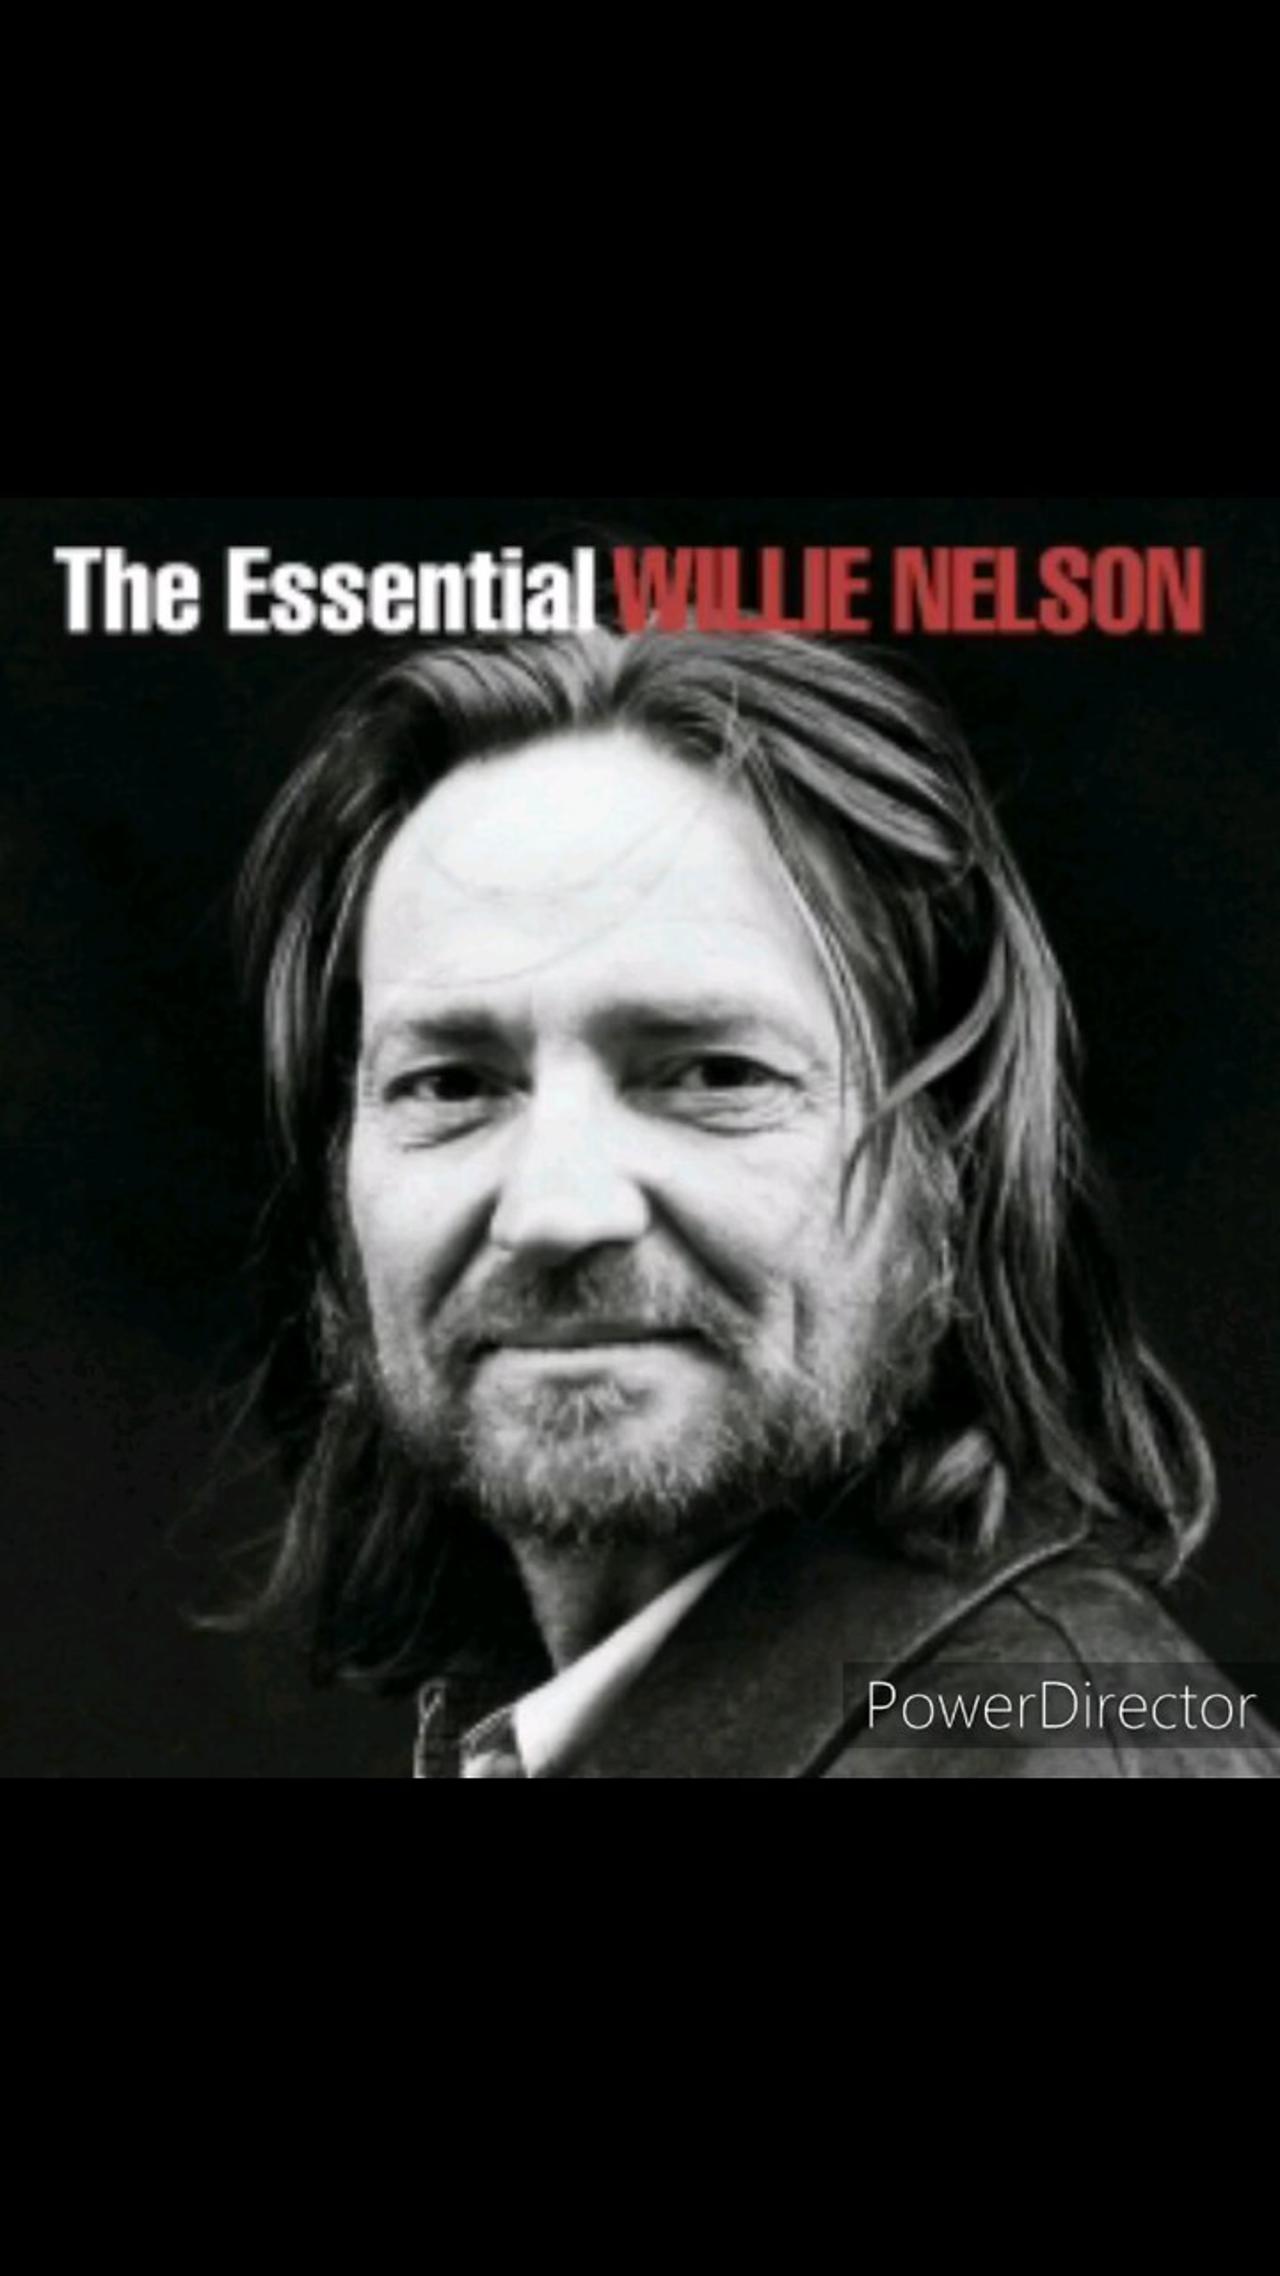 Willie Nelson - Country Willie